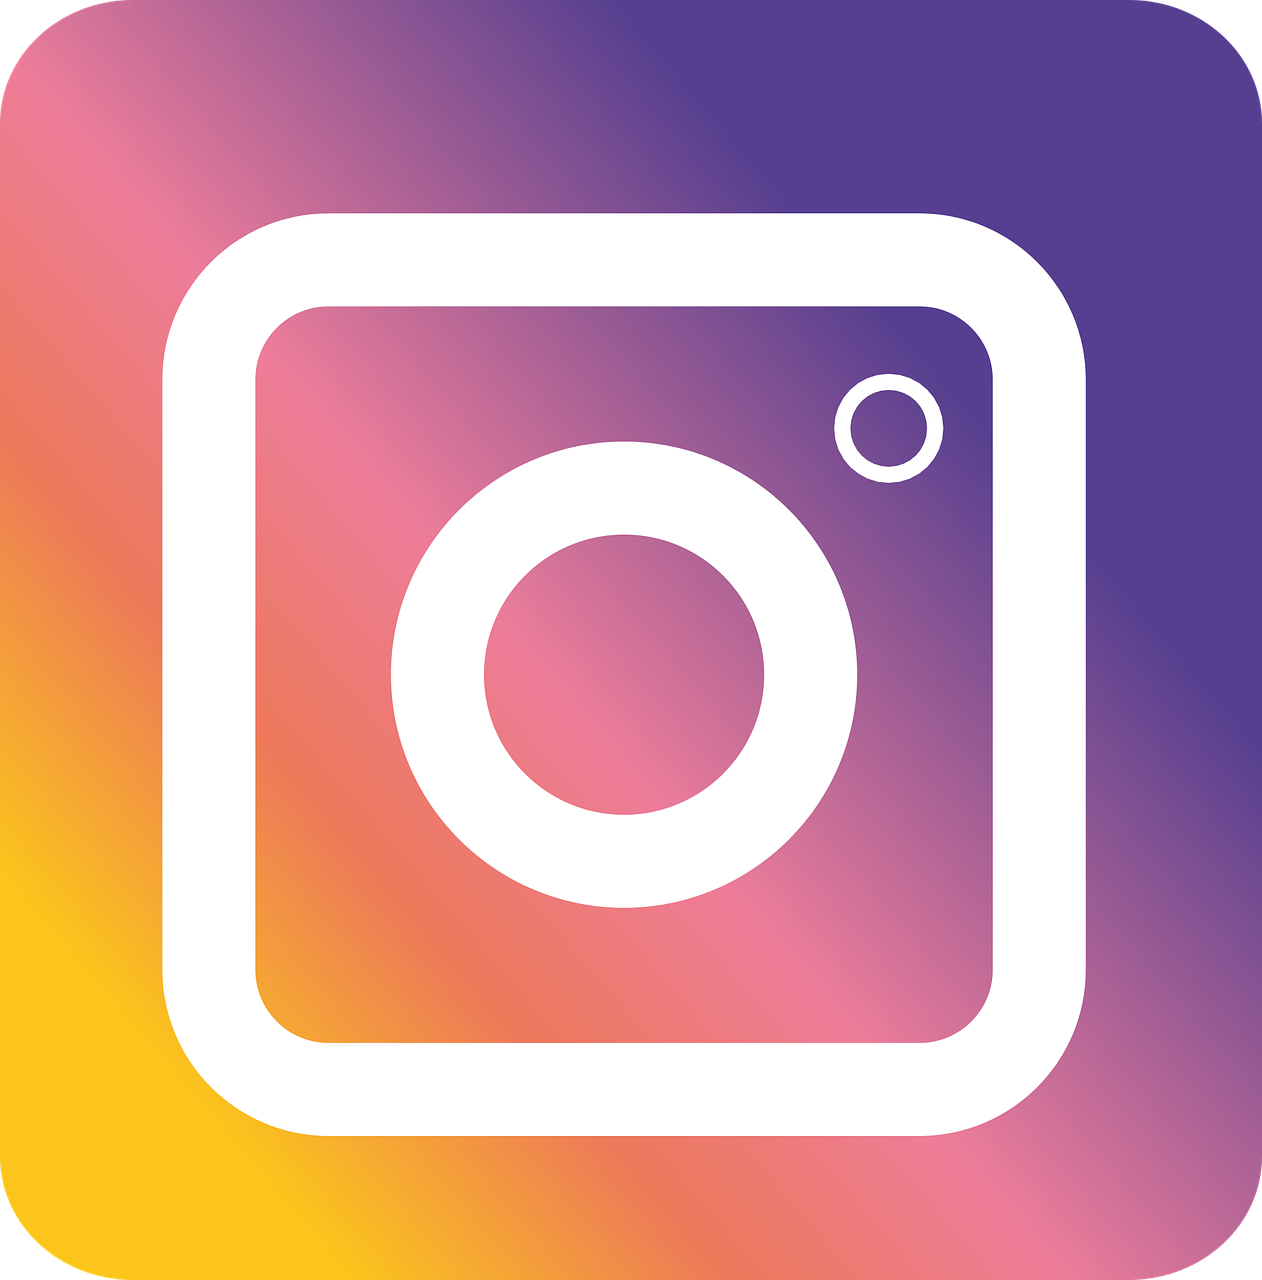 Instagram,insta logo,new images,free vector graphics,free pictures - free image from needpix.com